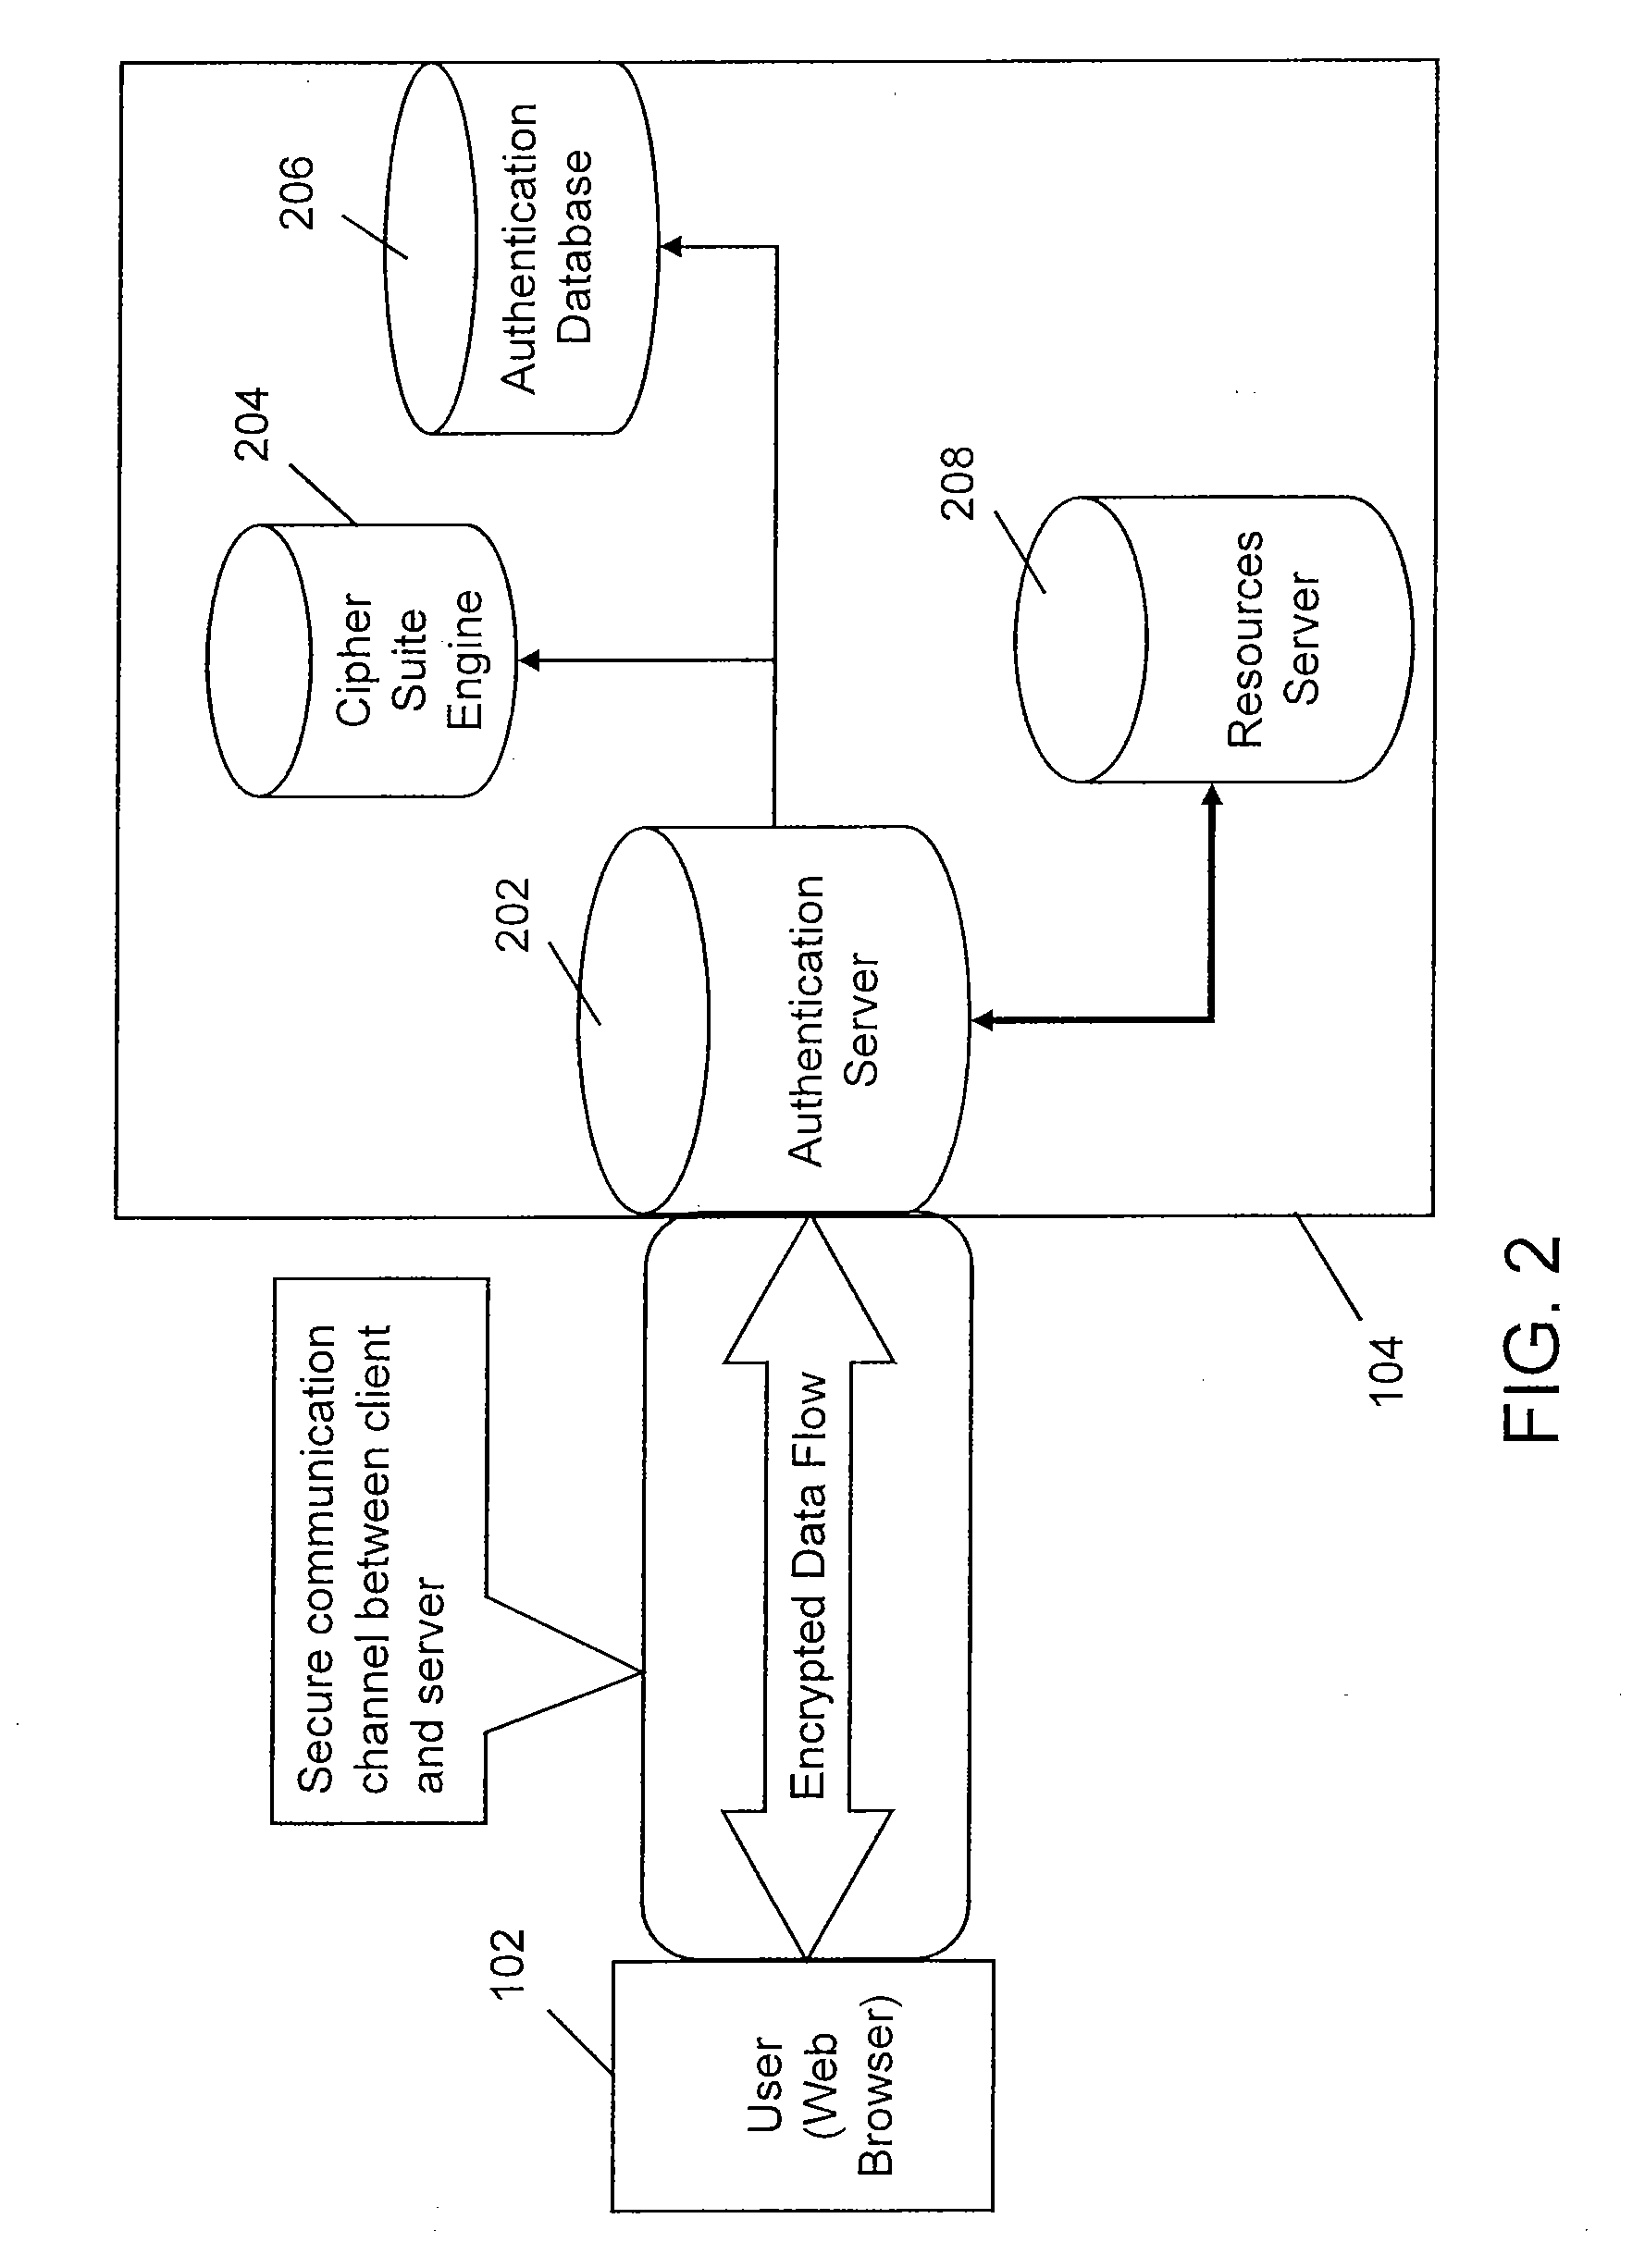 Multiple factor user authentication system